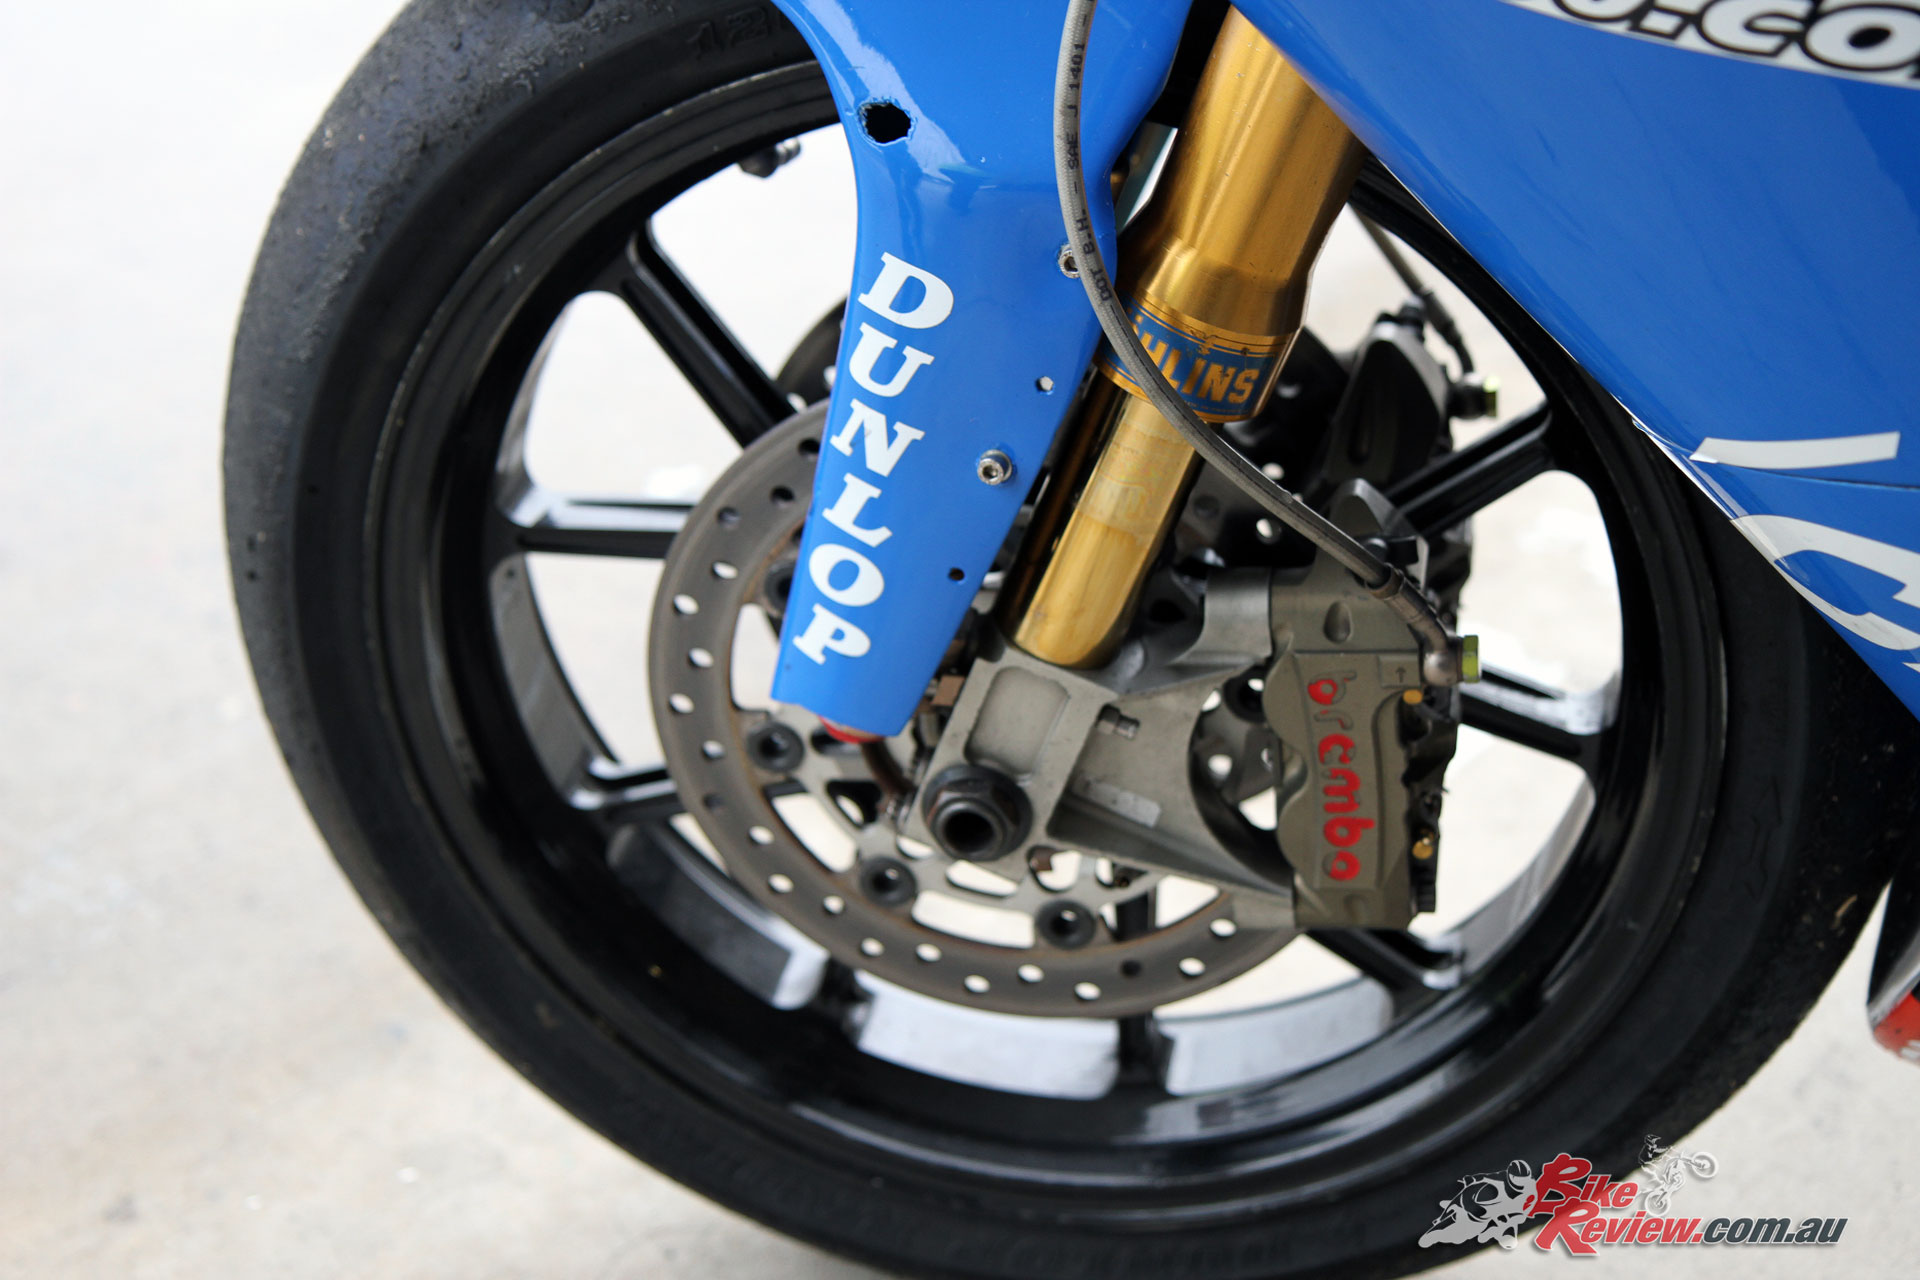 Factory spec Brembo brakes offer incredible performance, when you consider just how light this machine is